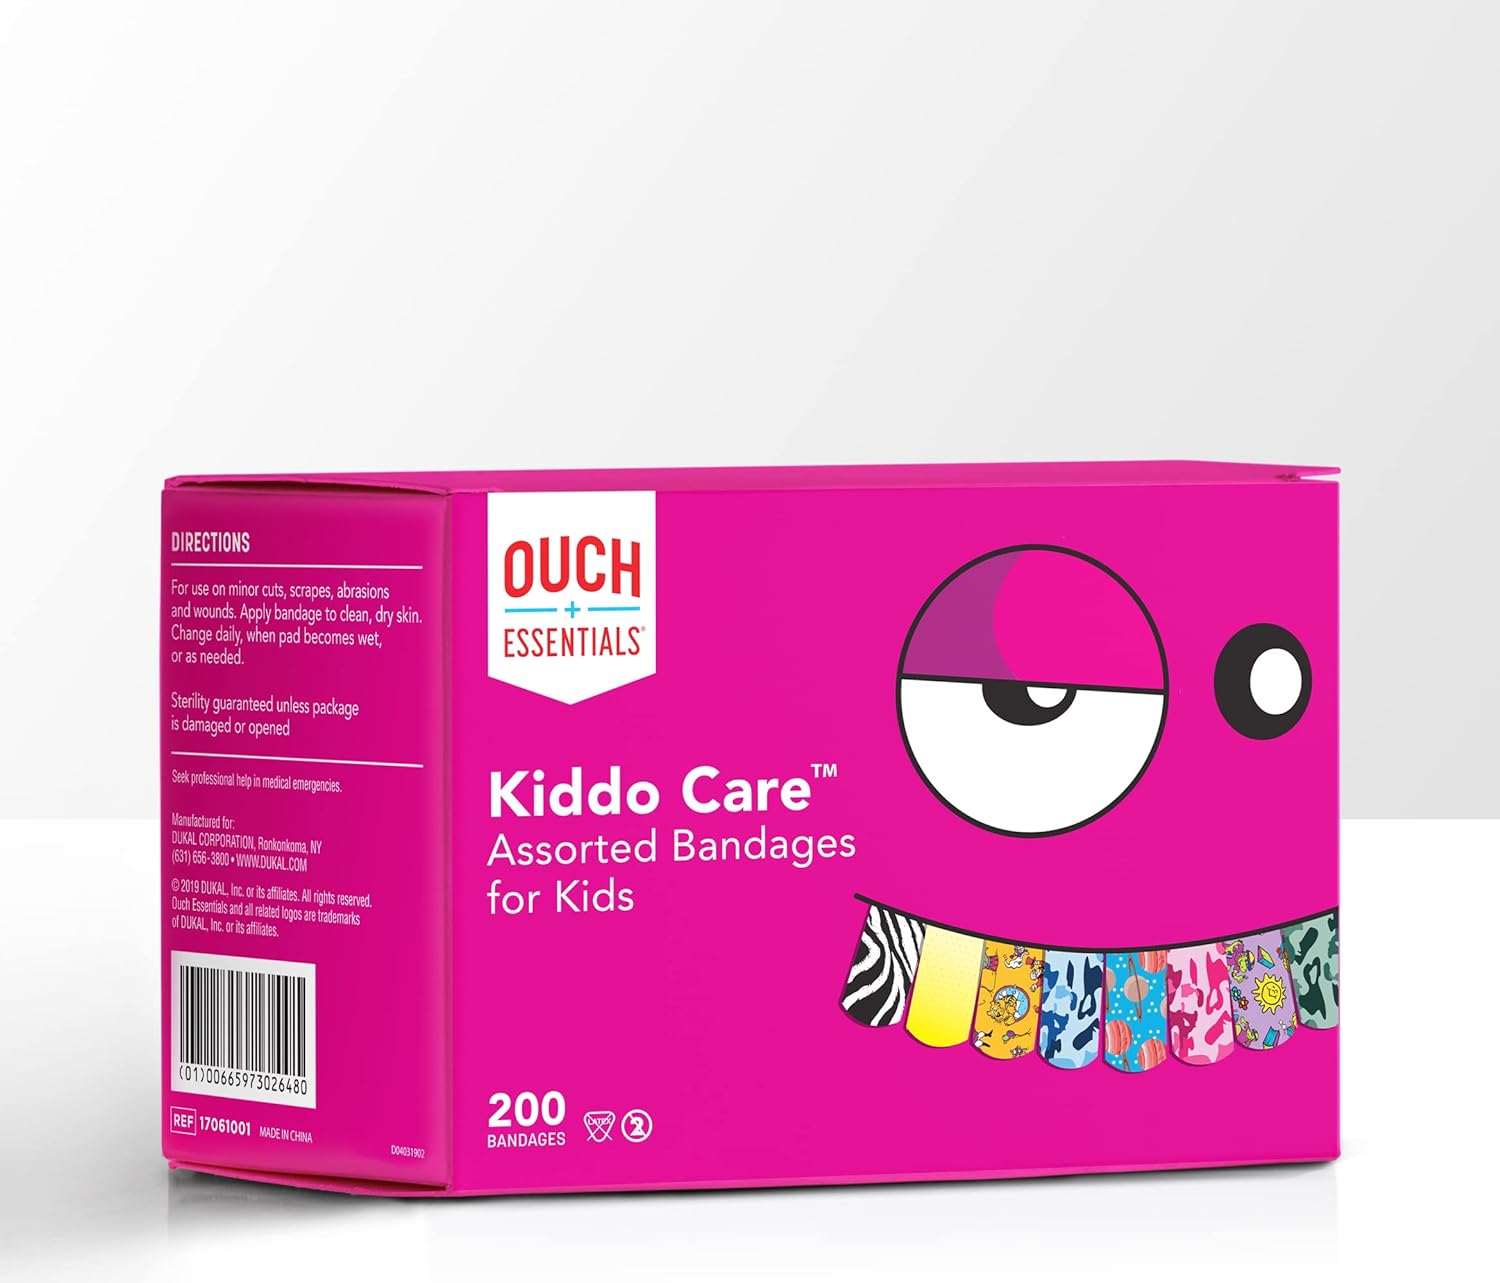 Ouch Essentials Kiddo Care - Kids Adhesive Bandages, Assorted Styles, 200 Count